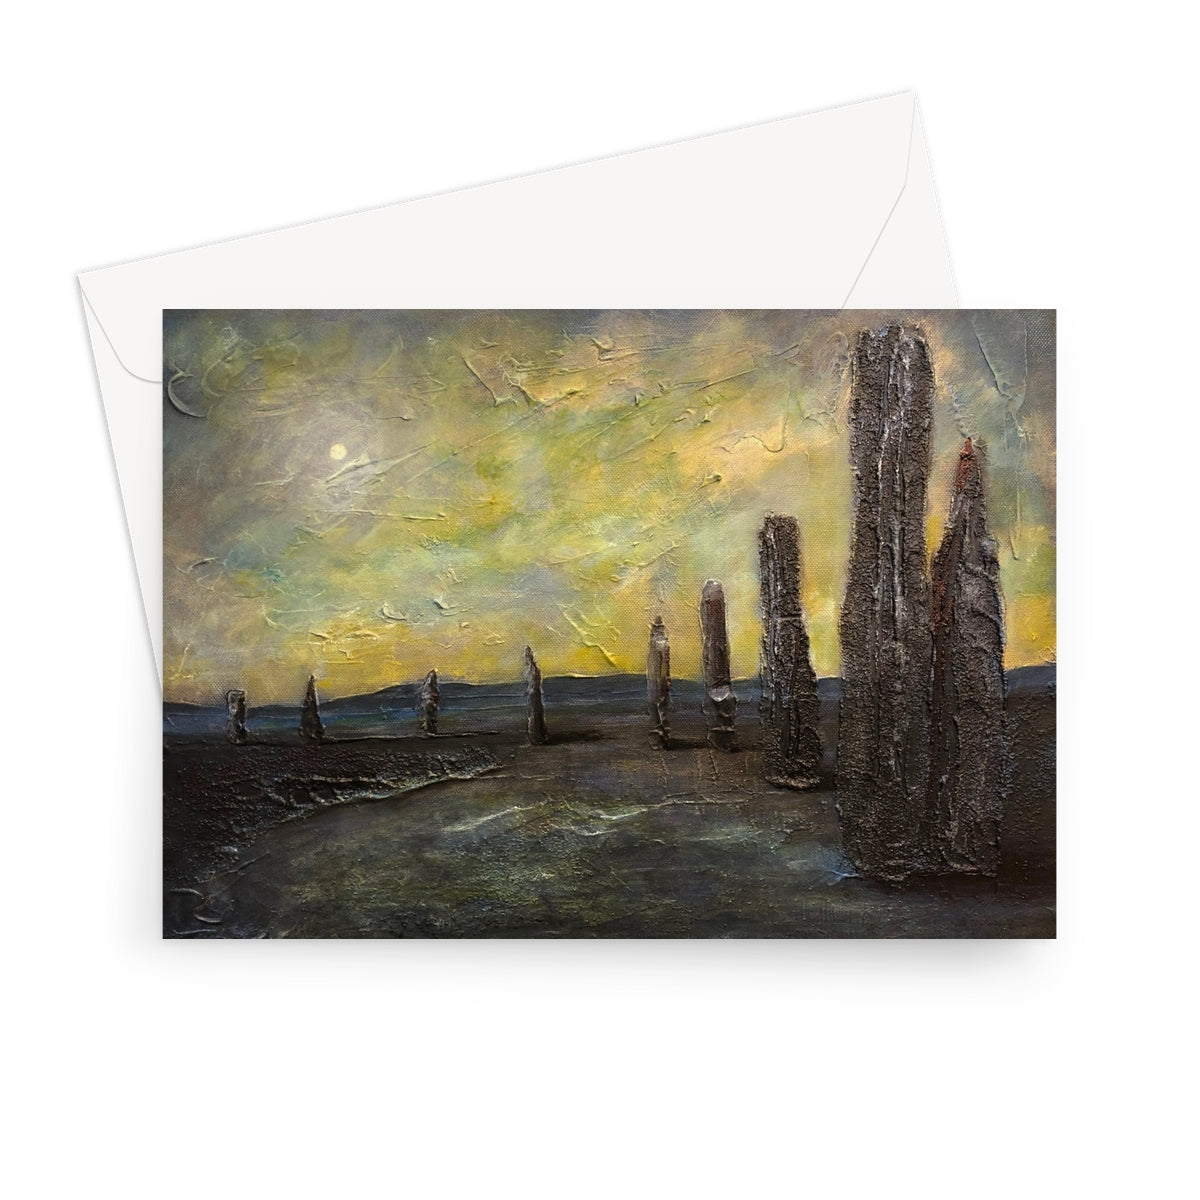 An Ethereal Ring Of Brodgar Art Gifts Greeting Card-Greetings Cards-Orkney Art Gallery-7"x5"-1 Card-Paintings, Prints, Homeware, Art Gifts From Scotland By Scottish Artist Kevin Hunter